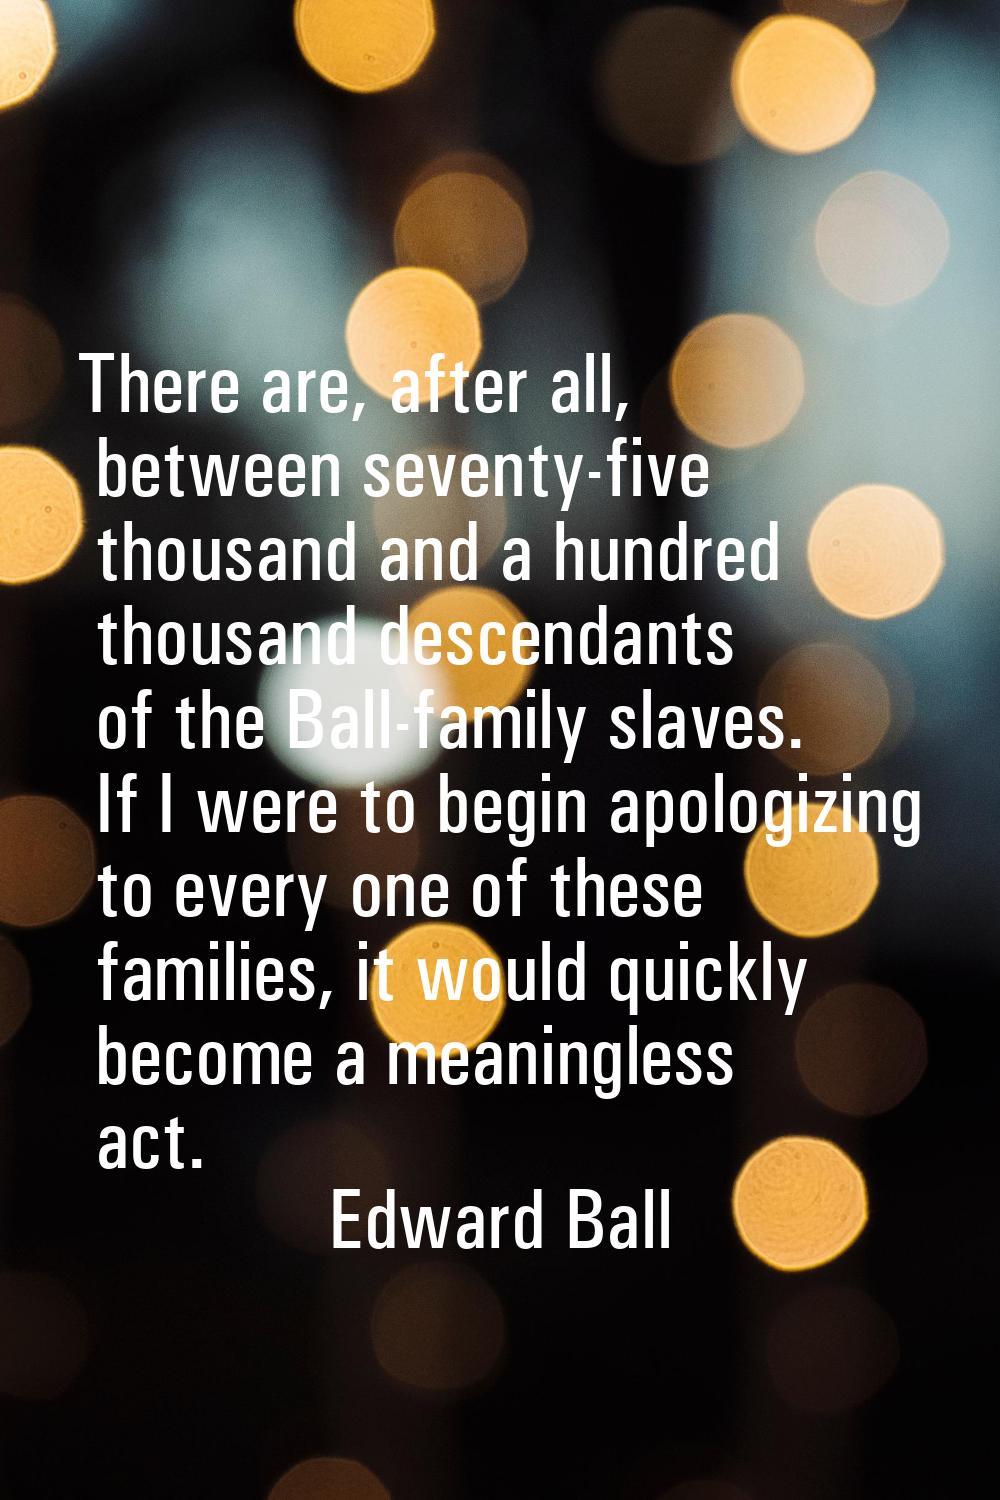 There are, after all, between seventy-five thousand and a hundred thousand descendants of the Ball-